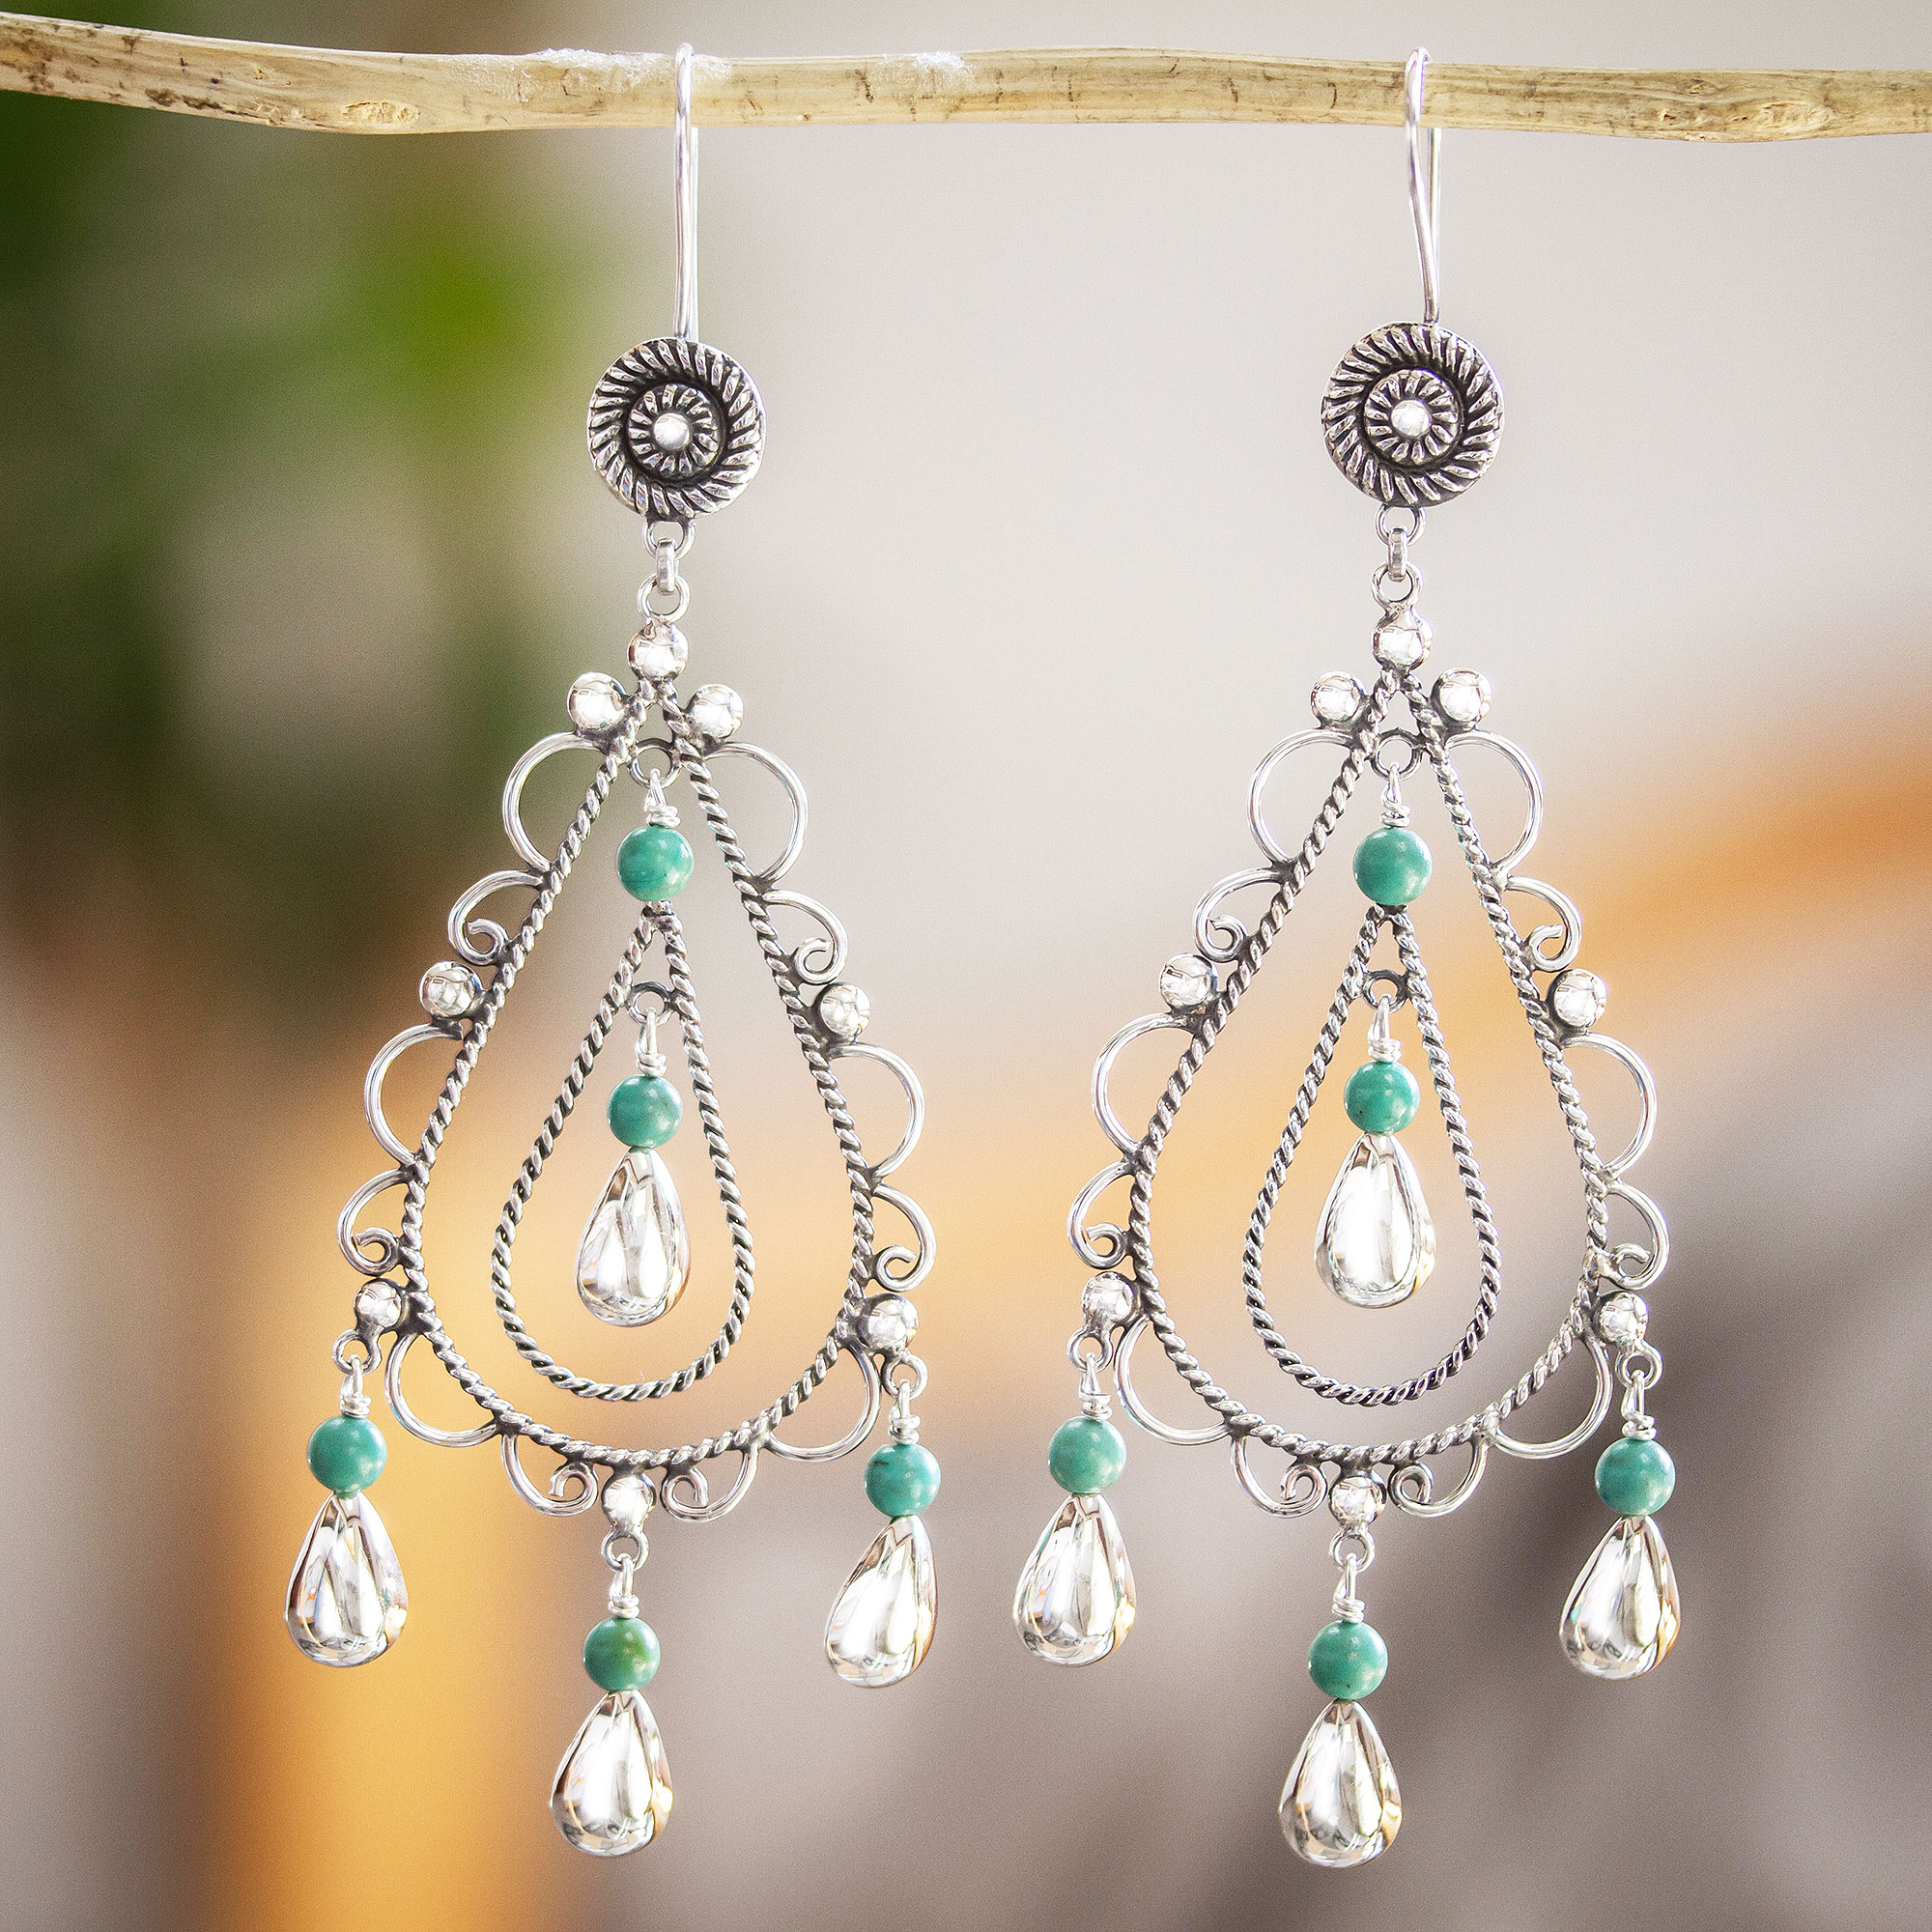 925 Sterling Silver and Turquoise Earrings from Mexico - Novica